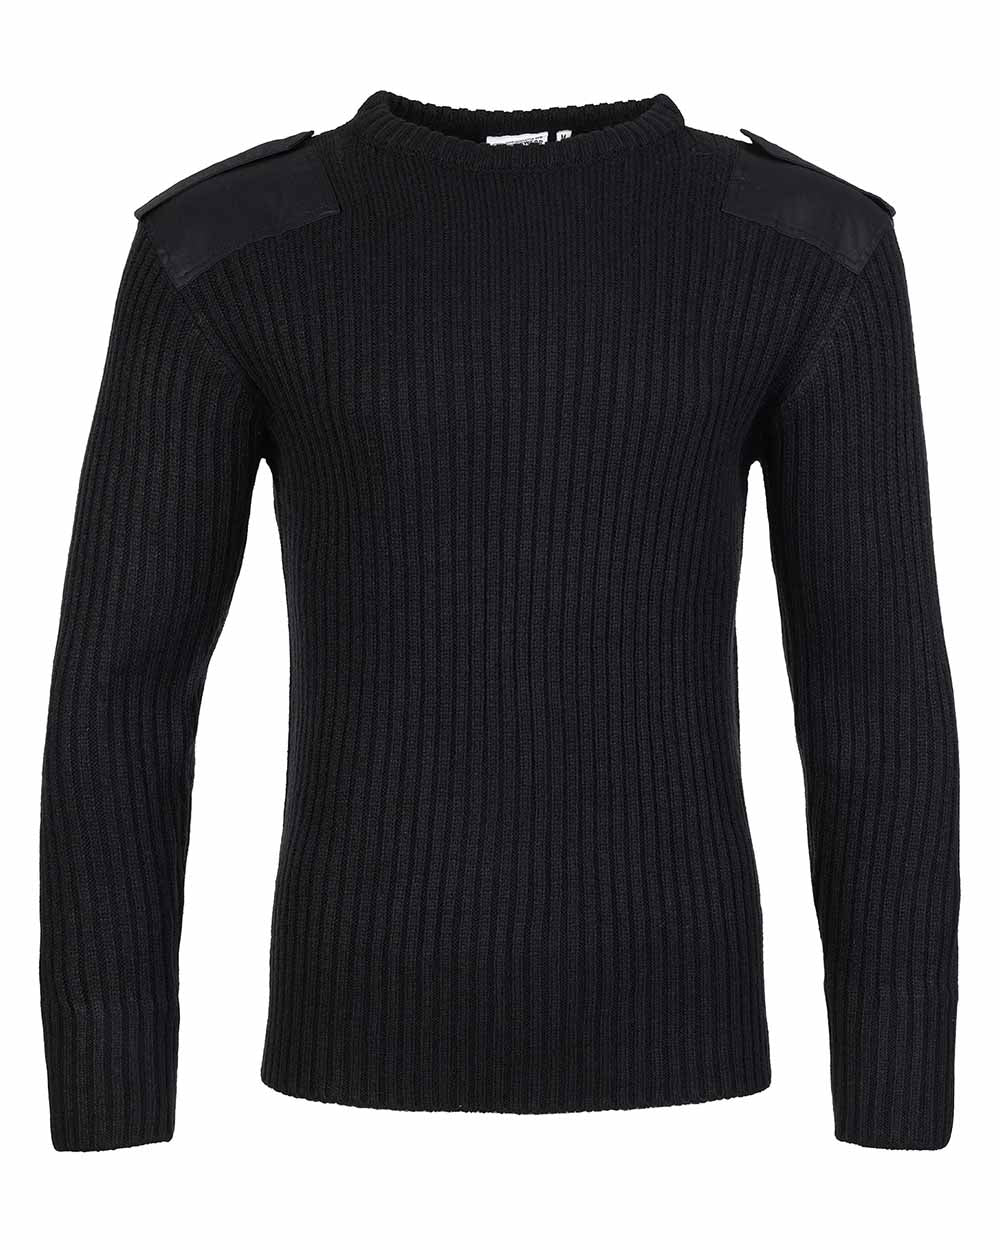 Black Crew Neck Military Style Jumper by Fort 